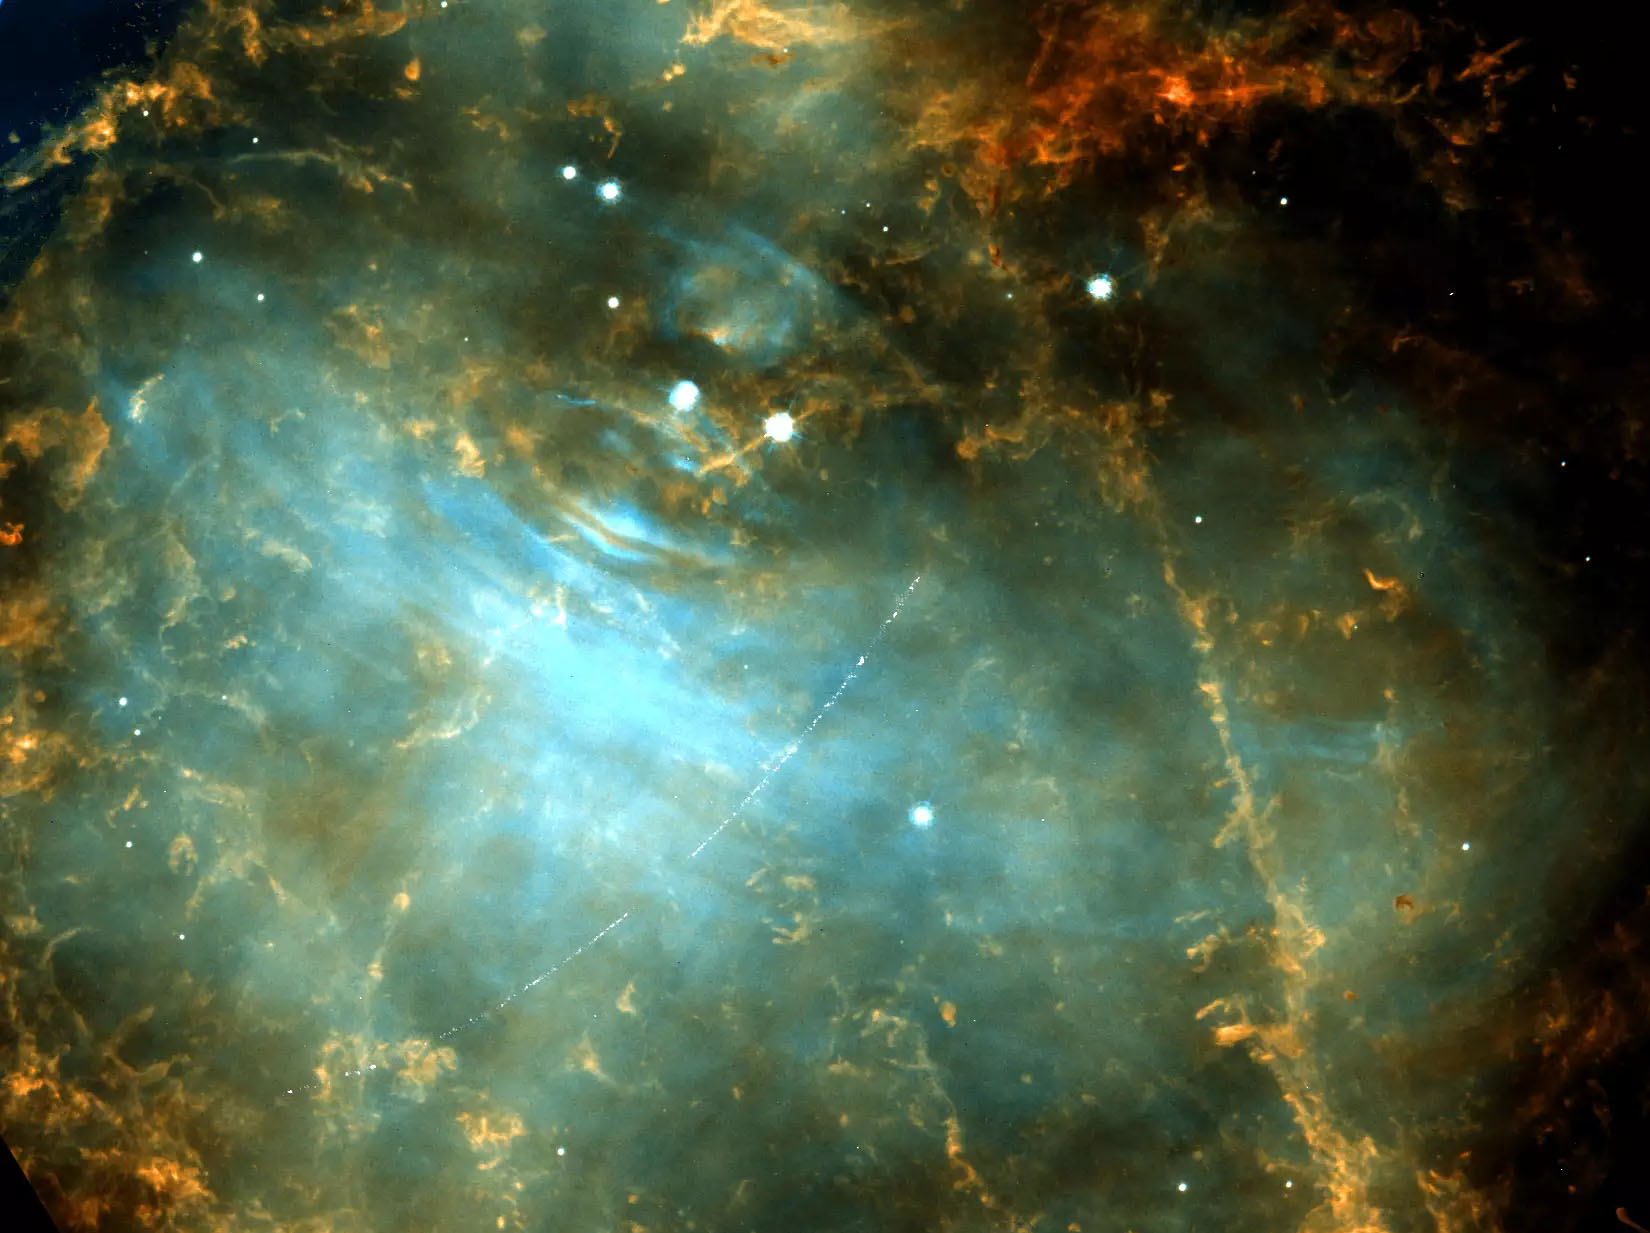 In this Hubble observation taken on 5 December 2005 the Main Belt asteroid 2001 SE101 passes in front of the Crab Nebula